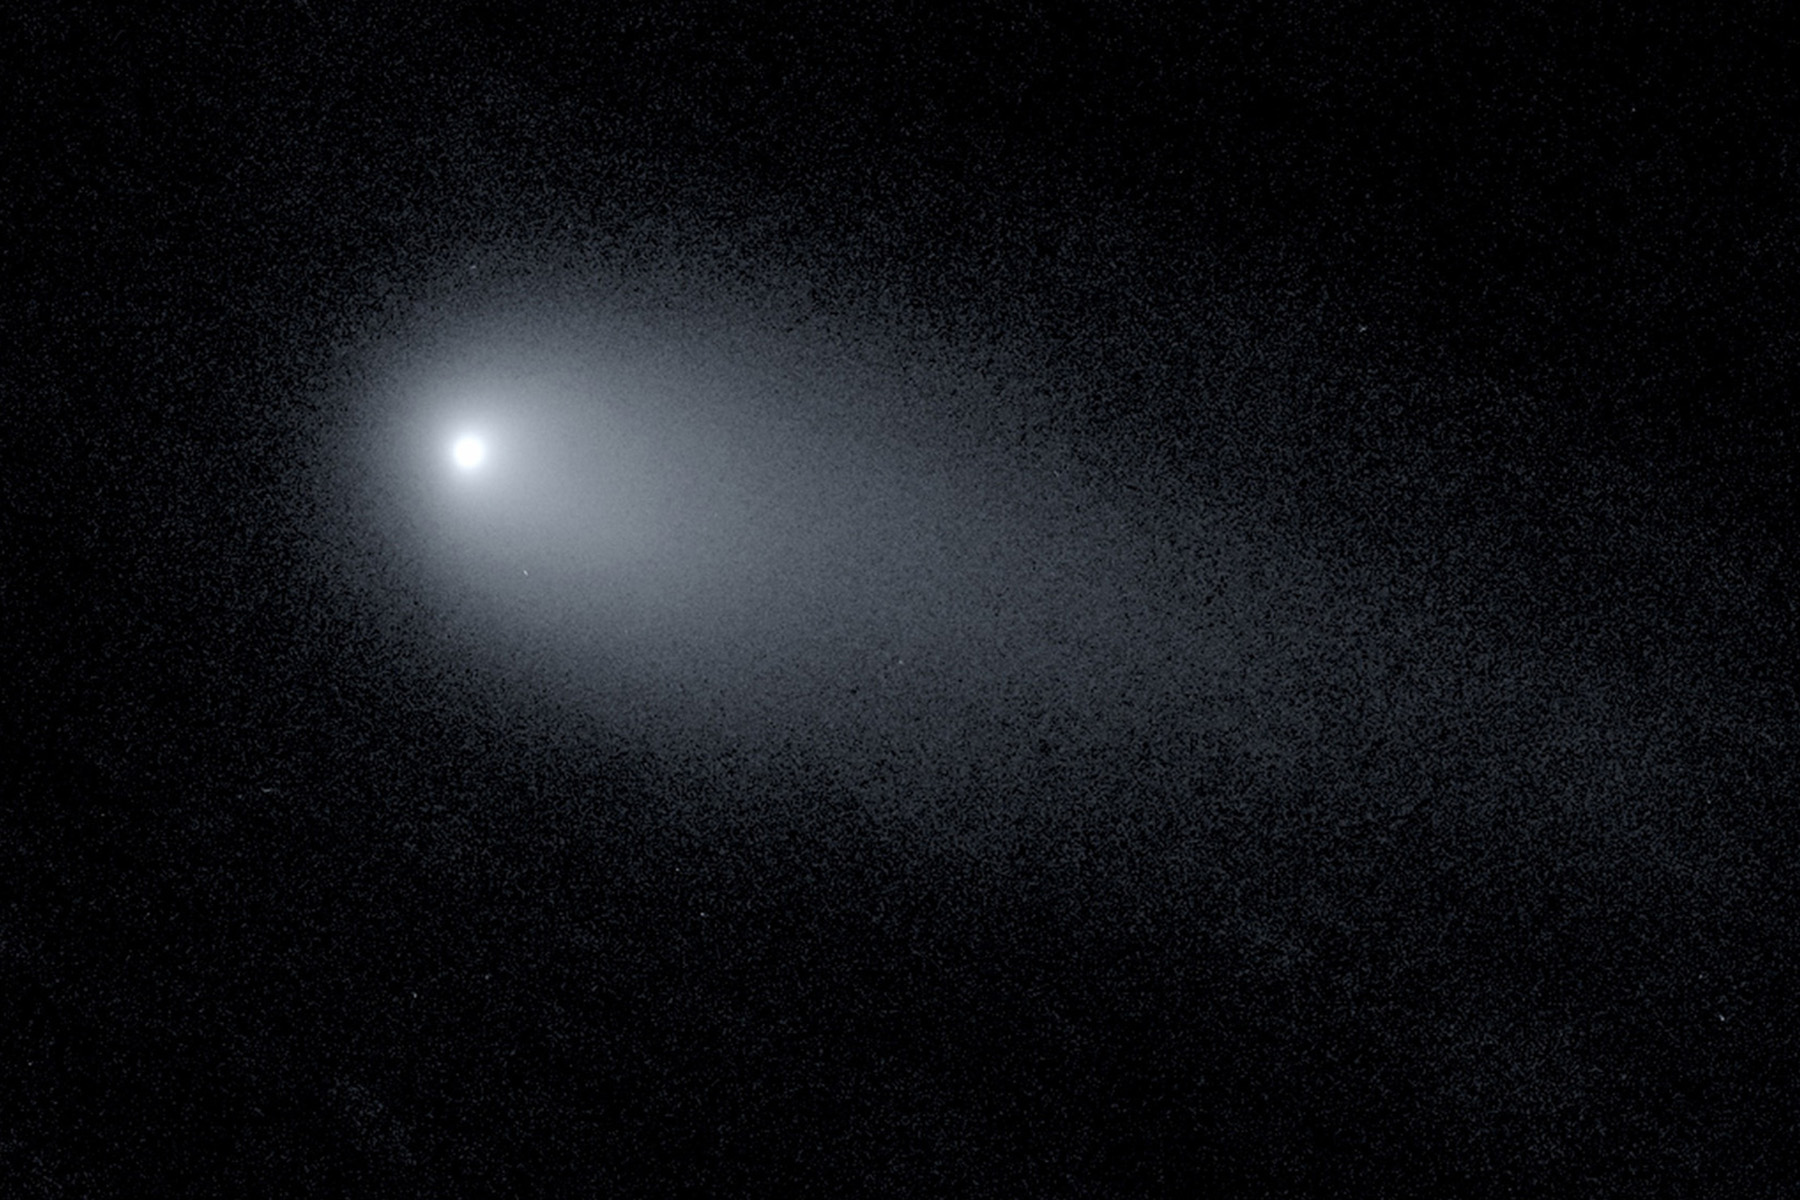 New Image Offers Close-up View of Interstellar Comet